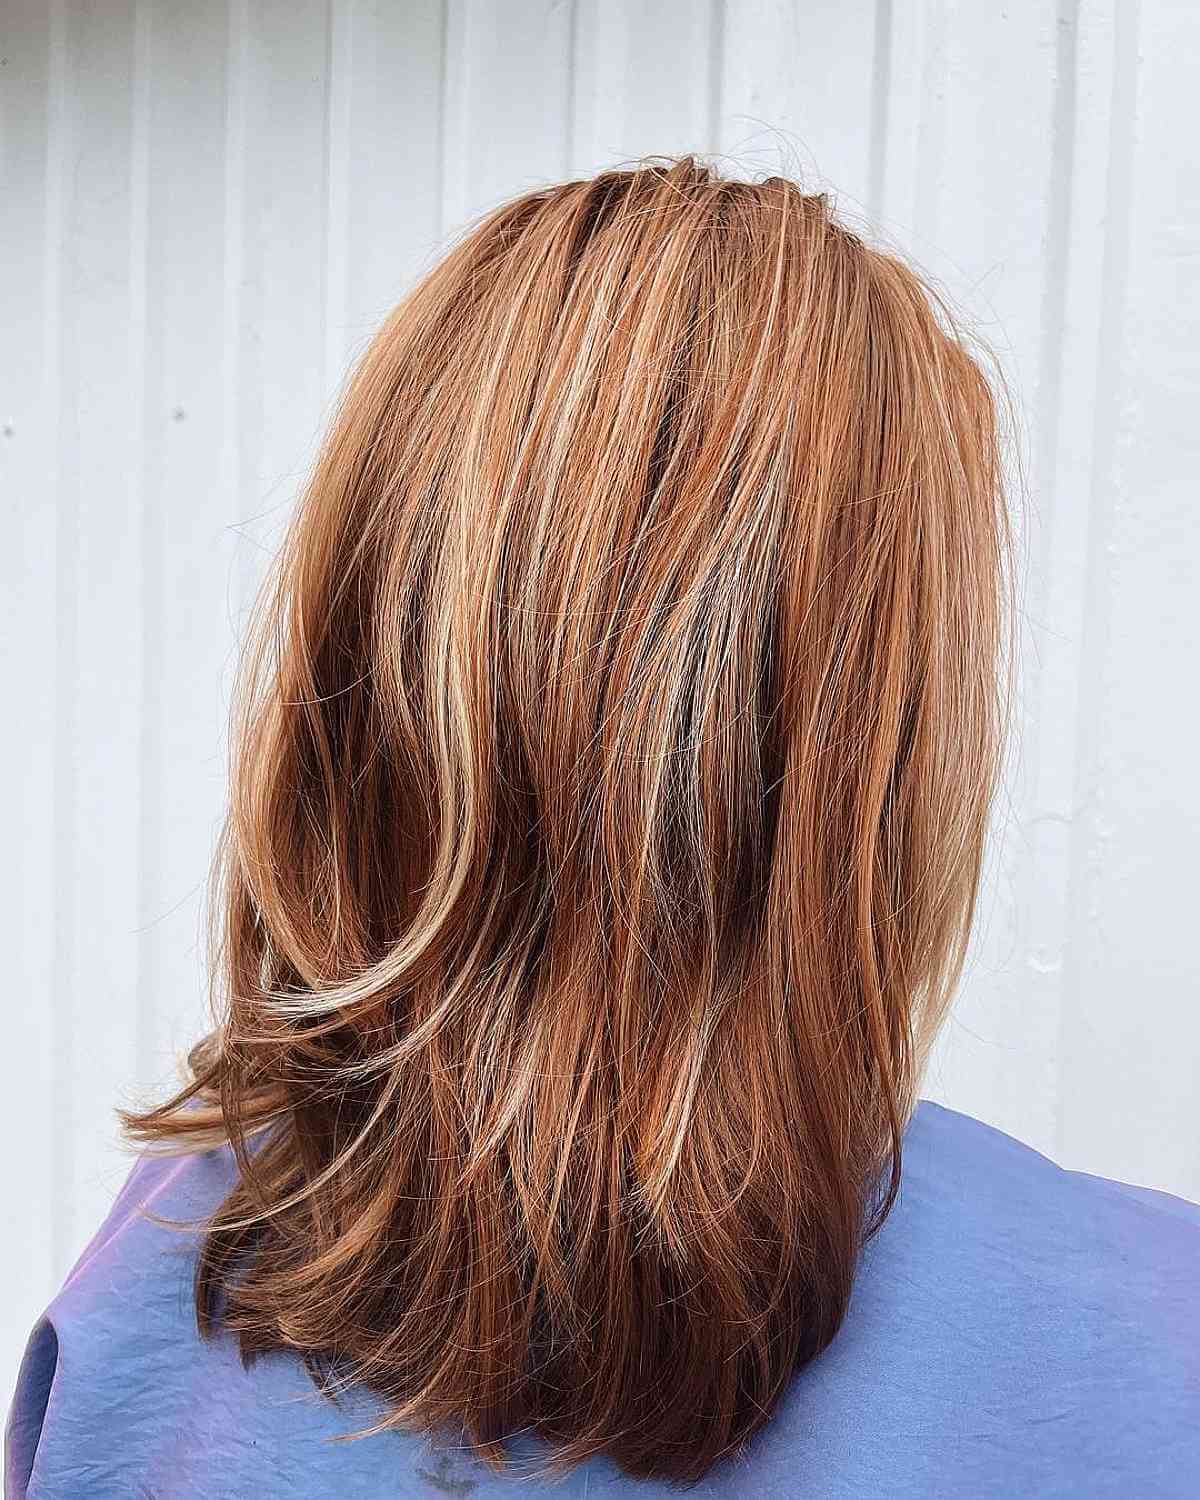 Strawberry Blonde with Peek-a-Boo Highlights